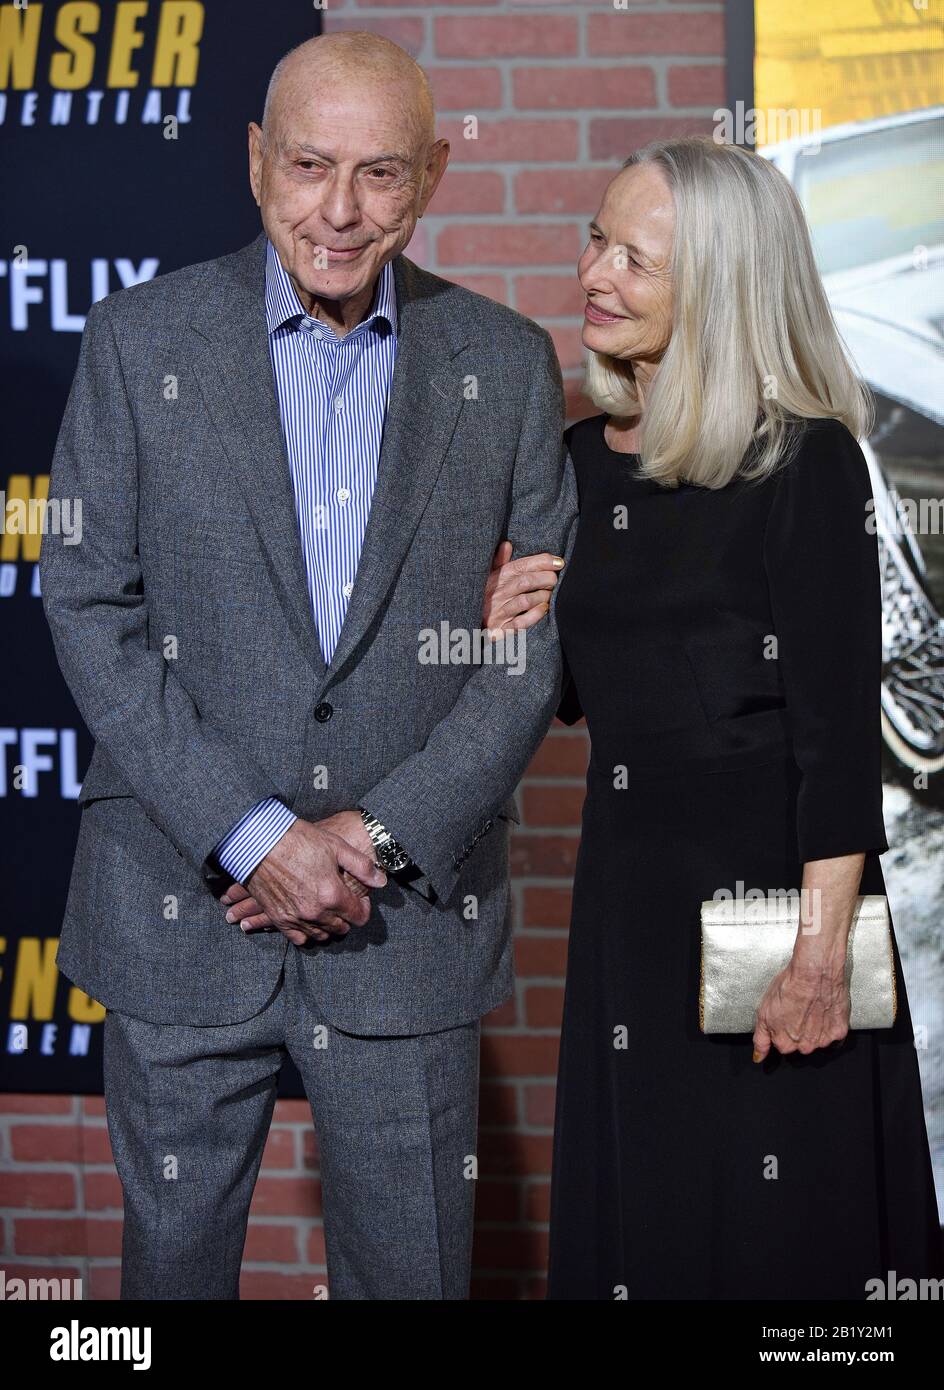 Los Angeles, United States. 28th Feb, 2020. Alan Arkin (L) and his wife Suzanne Newlander Arkin arrive for the world premiere screening of 'Spenser Confidential' at the Regency Village Theatre in Los Angeles, California on Thursday, February 27, 2020. Photo by Chris Chew/UPI Credit: UPI/Alamy Live News Stock Photo